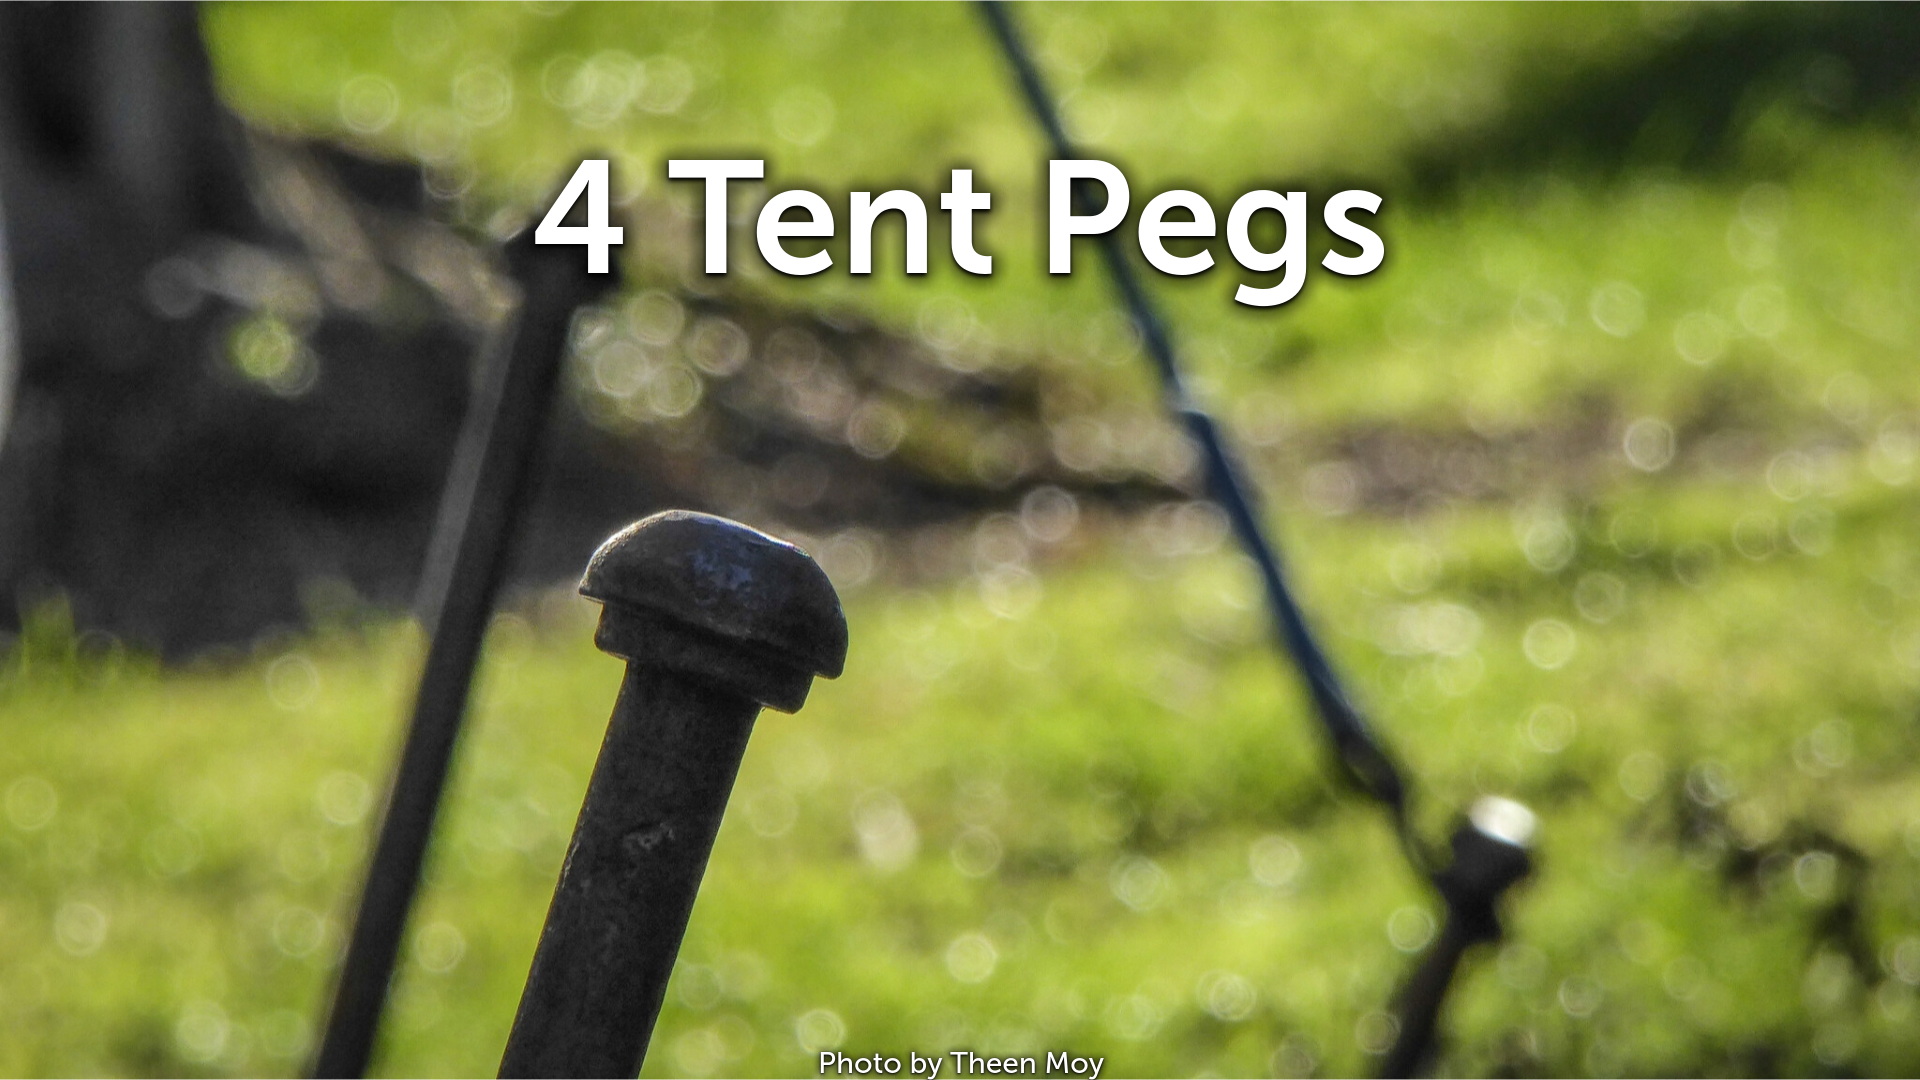 4 Tent Pegs banner